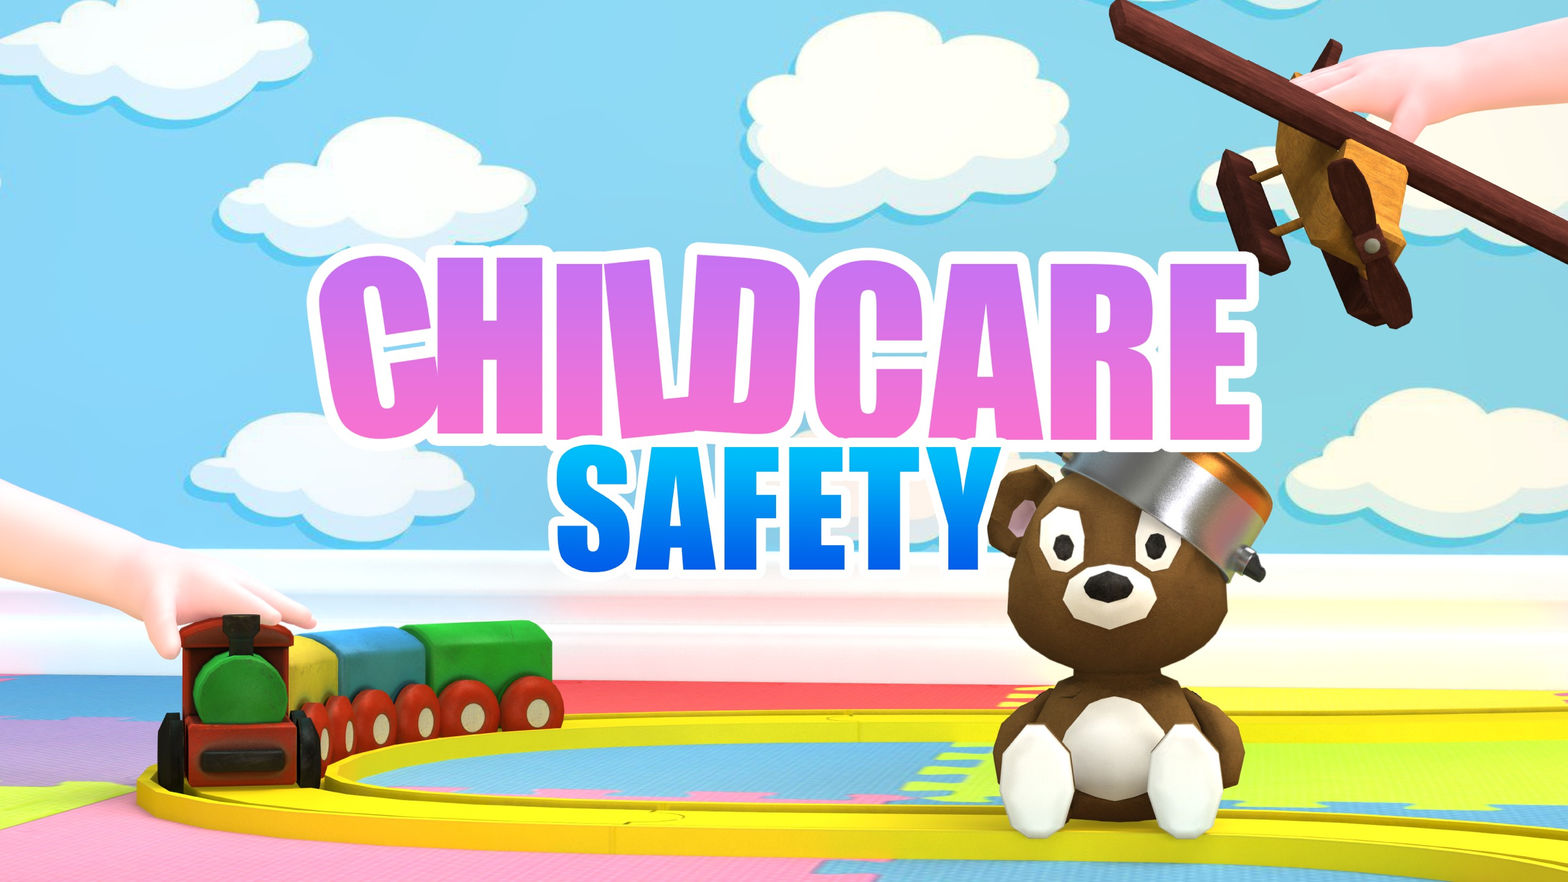 Childcare Safety